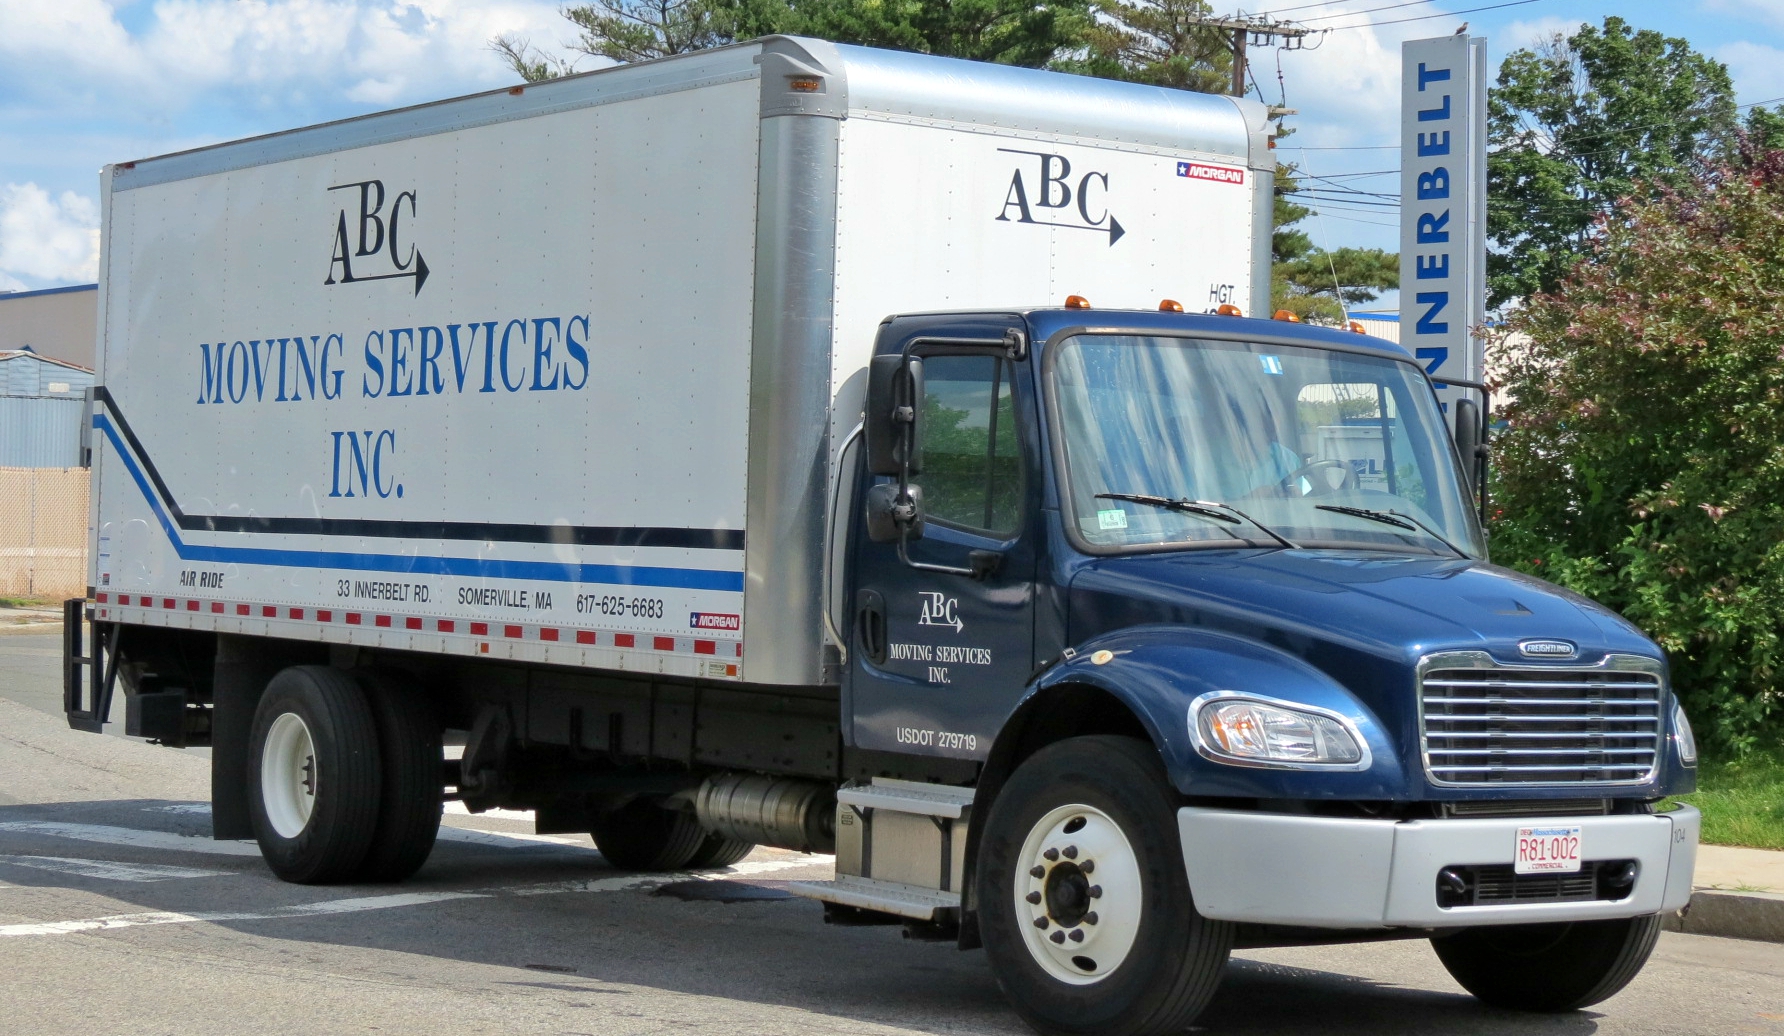 ABC Moving Services, Inc. - Commercial Moving & Storage